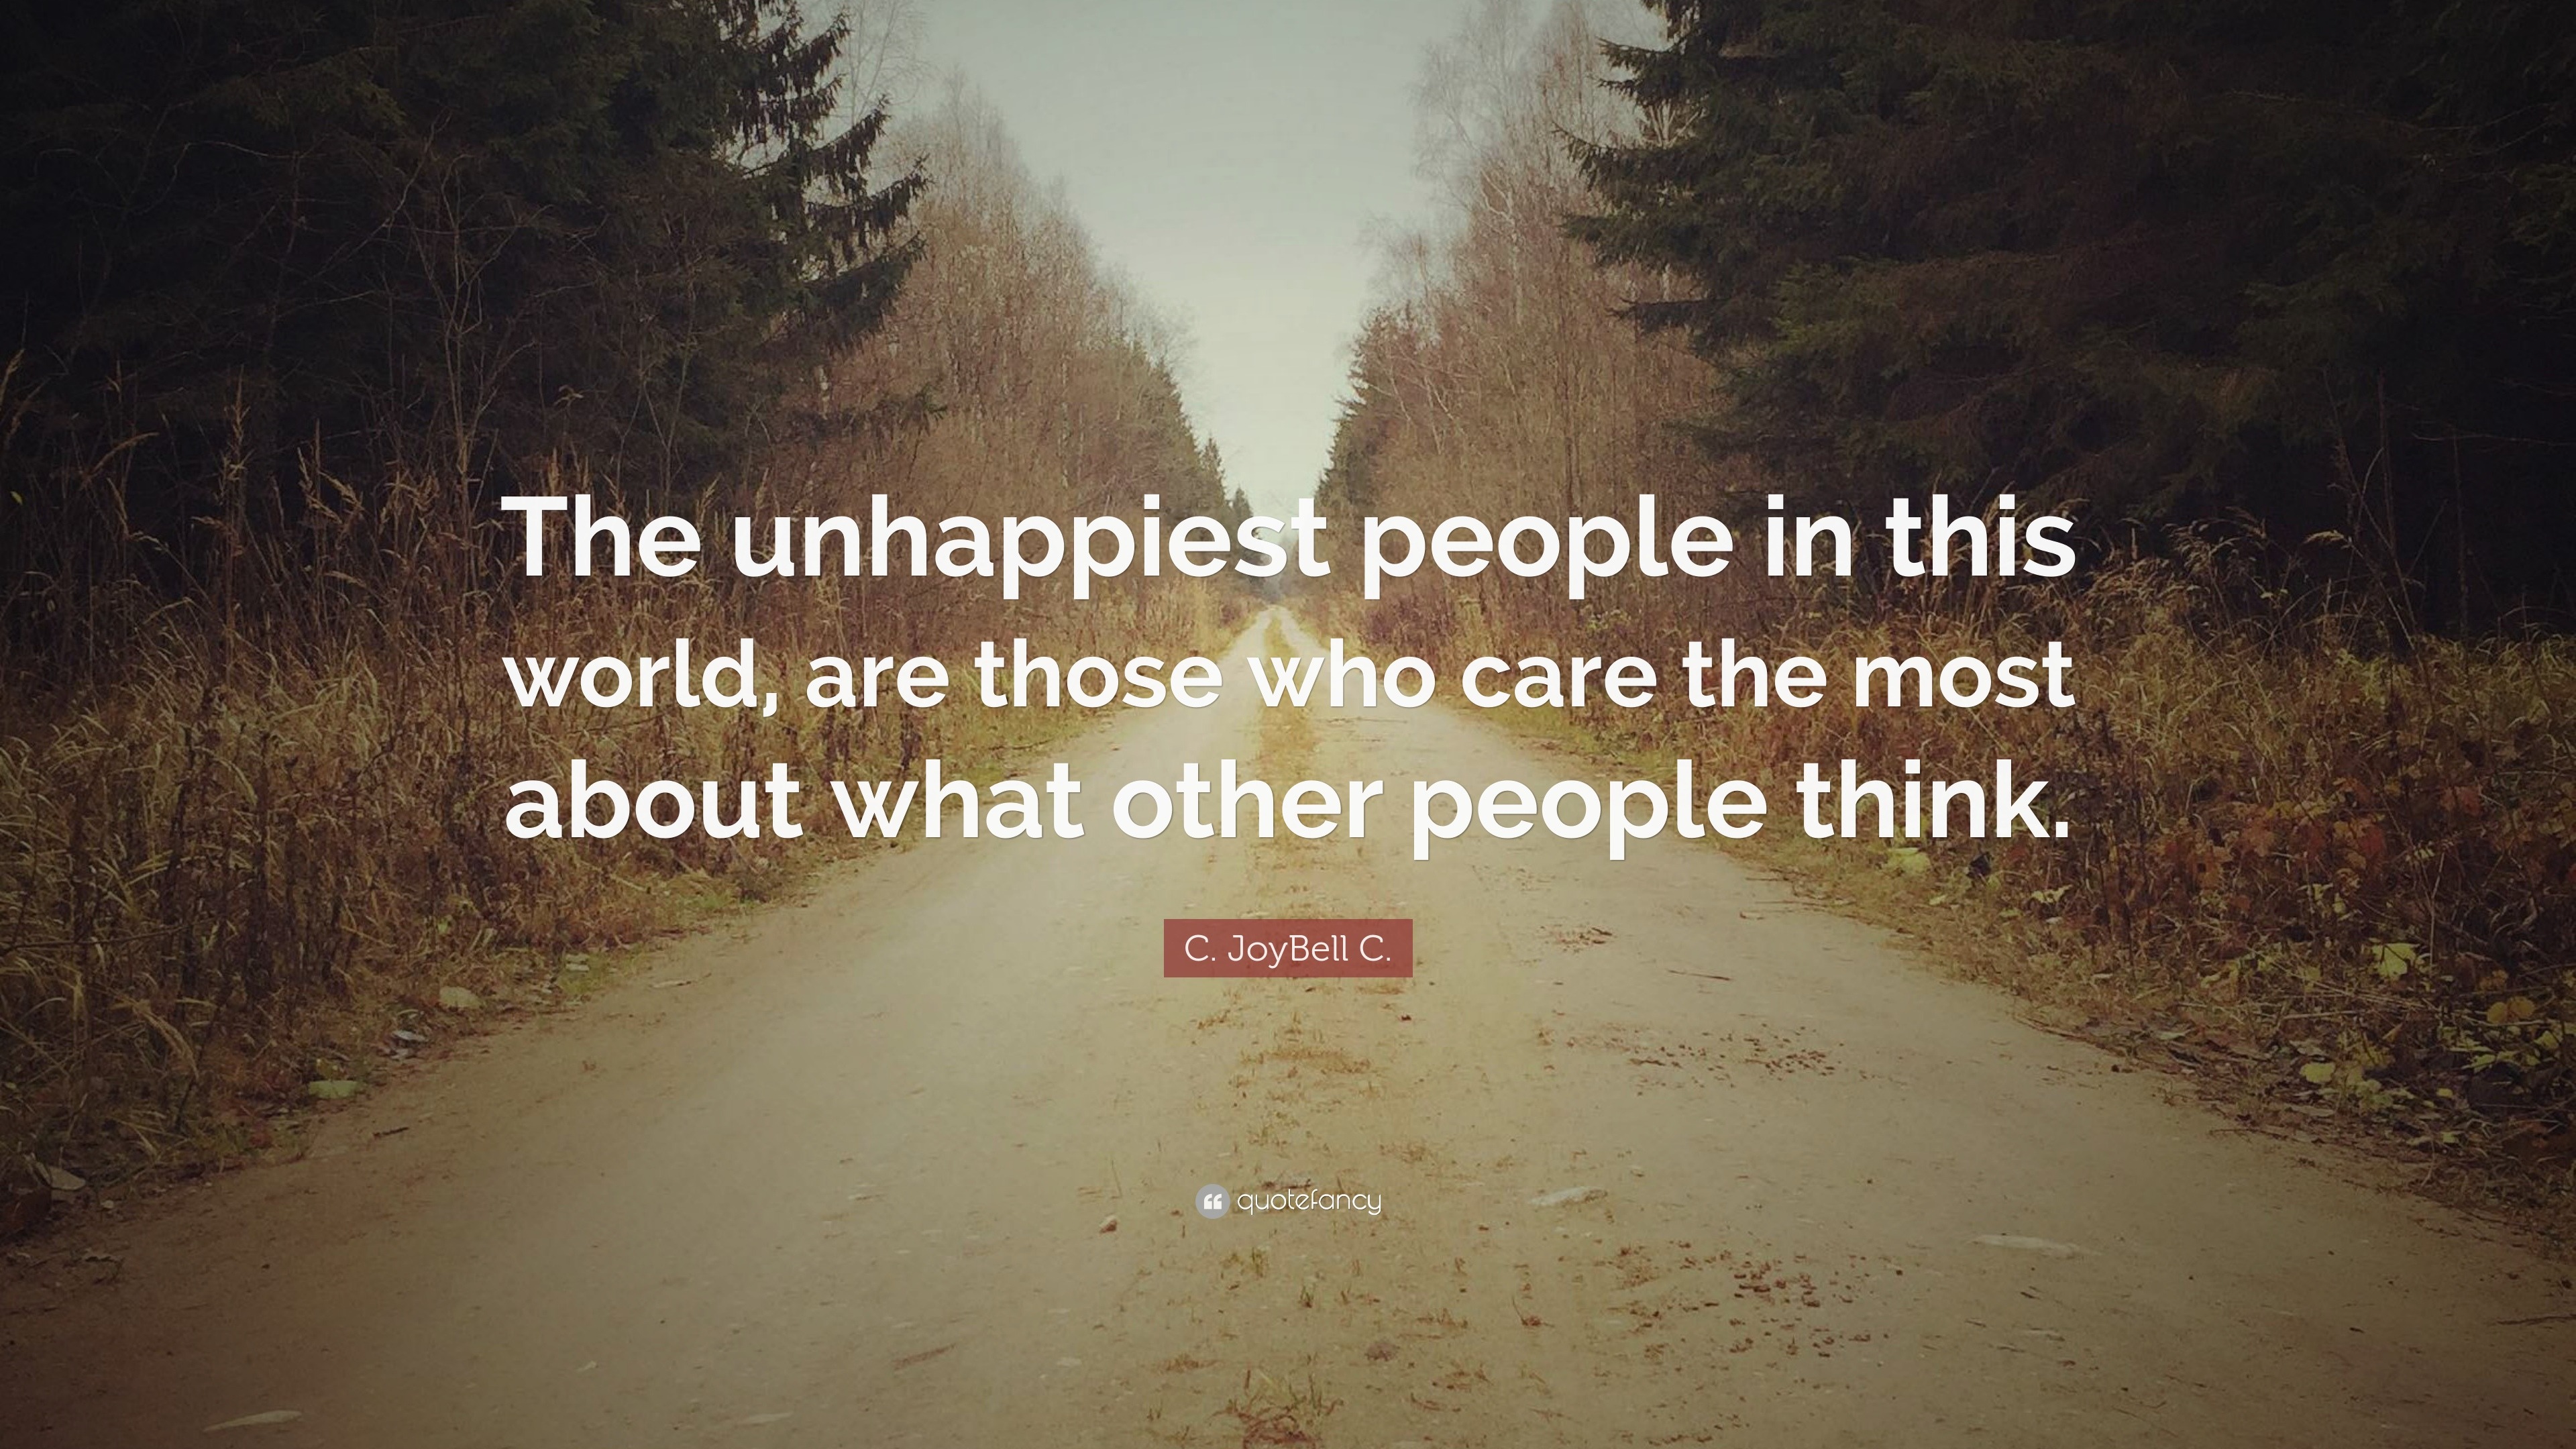 C. JoyBell C. Quote: “The unhappiest people in this world, are those ...